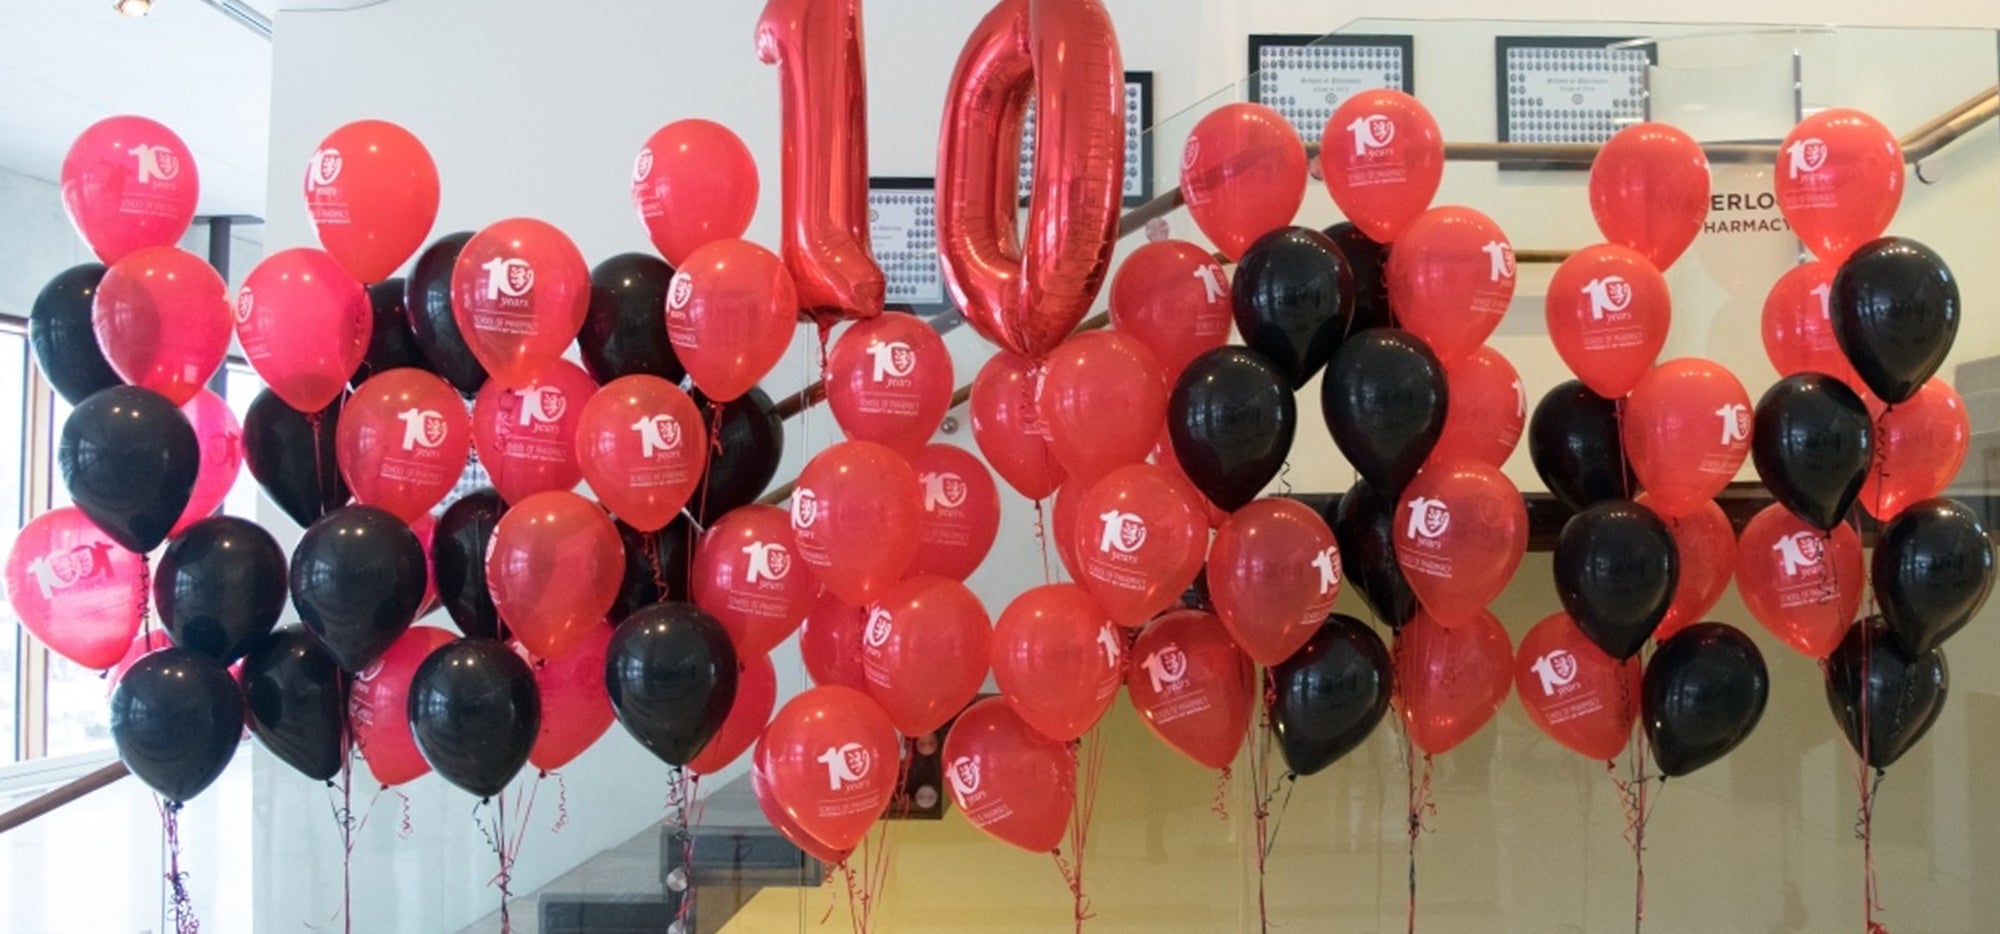 Red and black ballons with a big 10 balloon